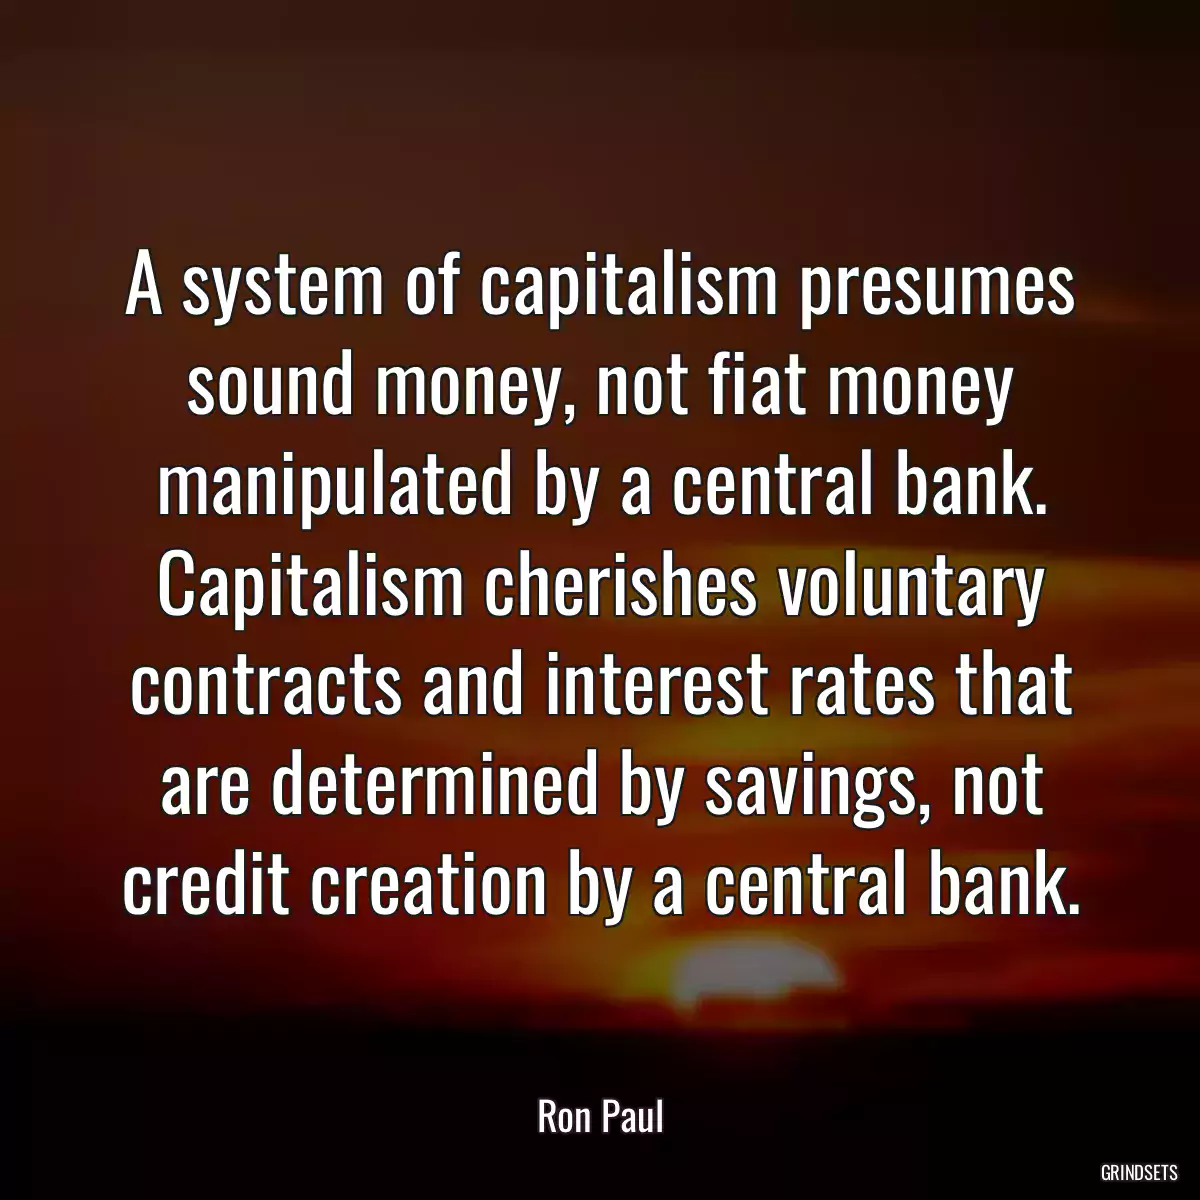 A system of capitalism presumes sound money, not fiat money manipulated by a central bank. Capitalism cherishes voluntary contracts and interest rates that are determined by savings, not credit creation by a central bank.